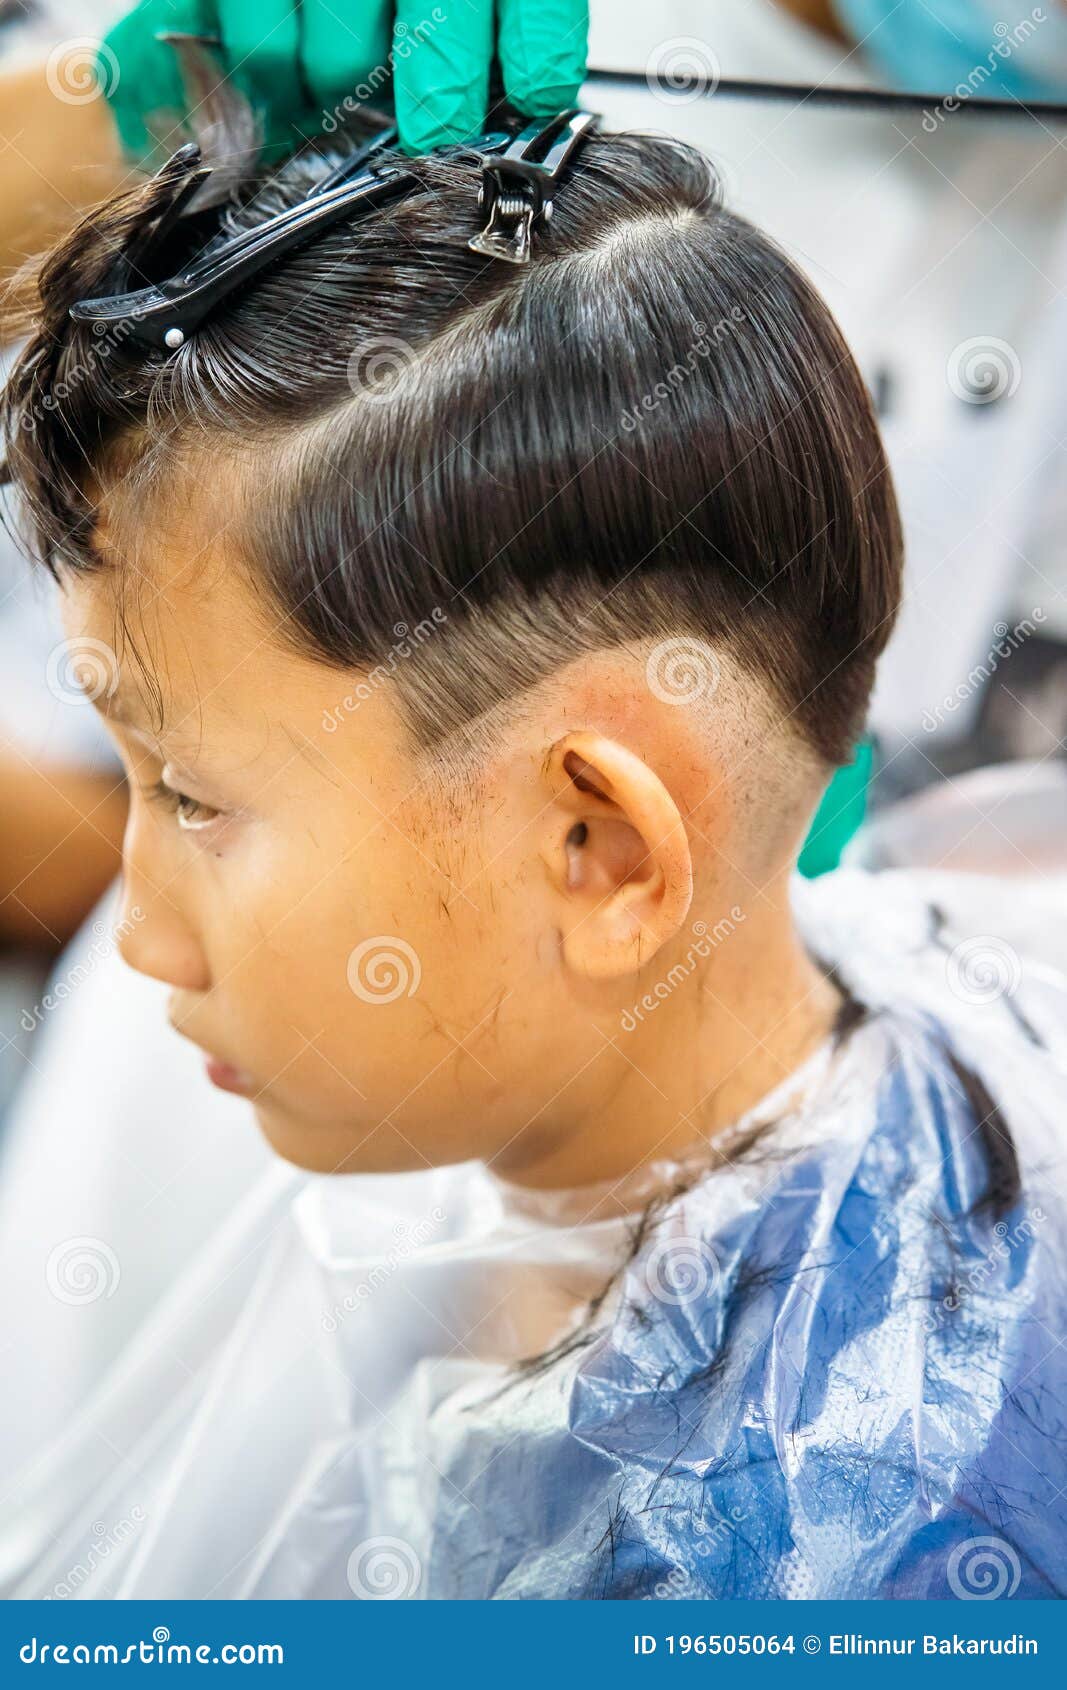 A Young Boy Getting His Hair Cut at Barber Shop, Barber Shop Rear View  Stock Photo - Image of clipper, client: 196505064